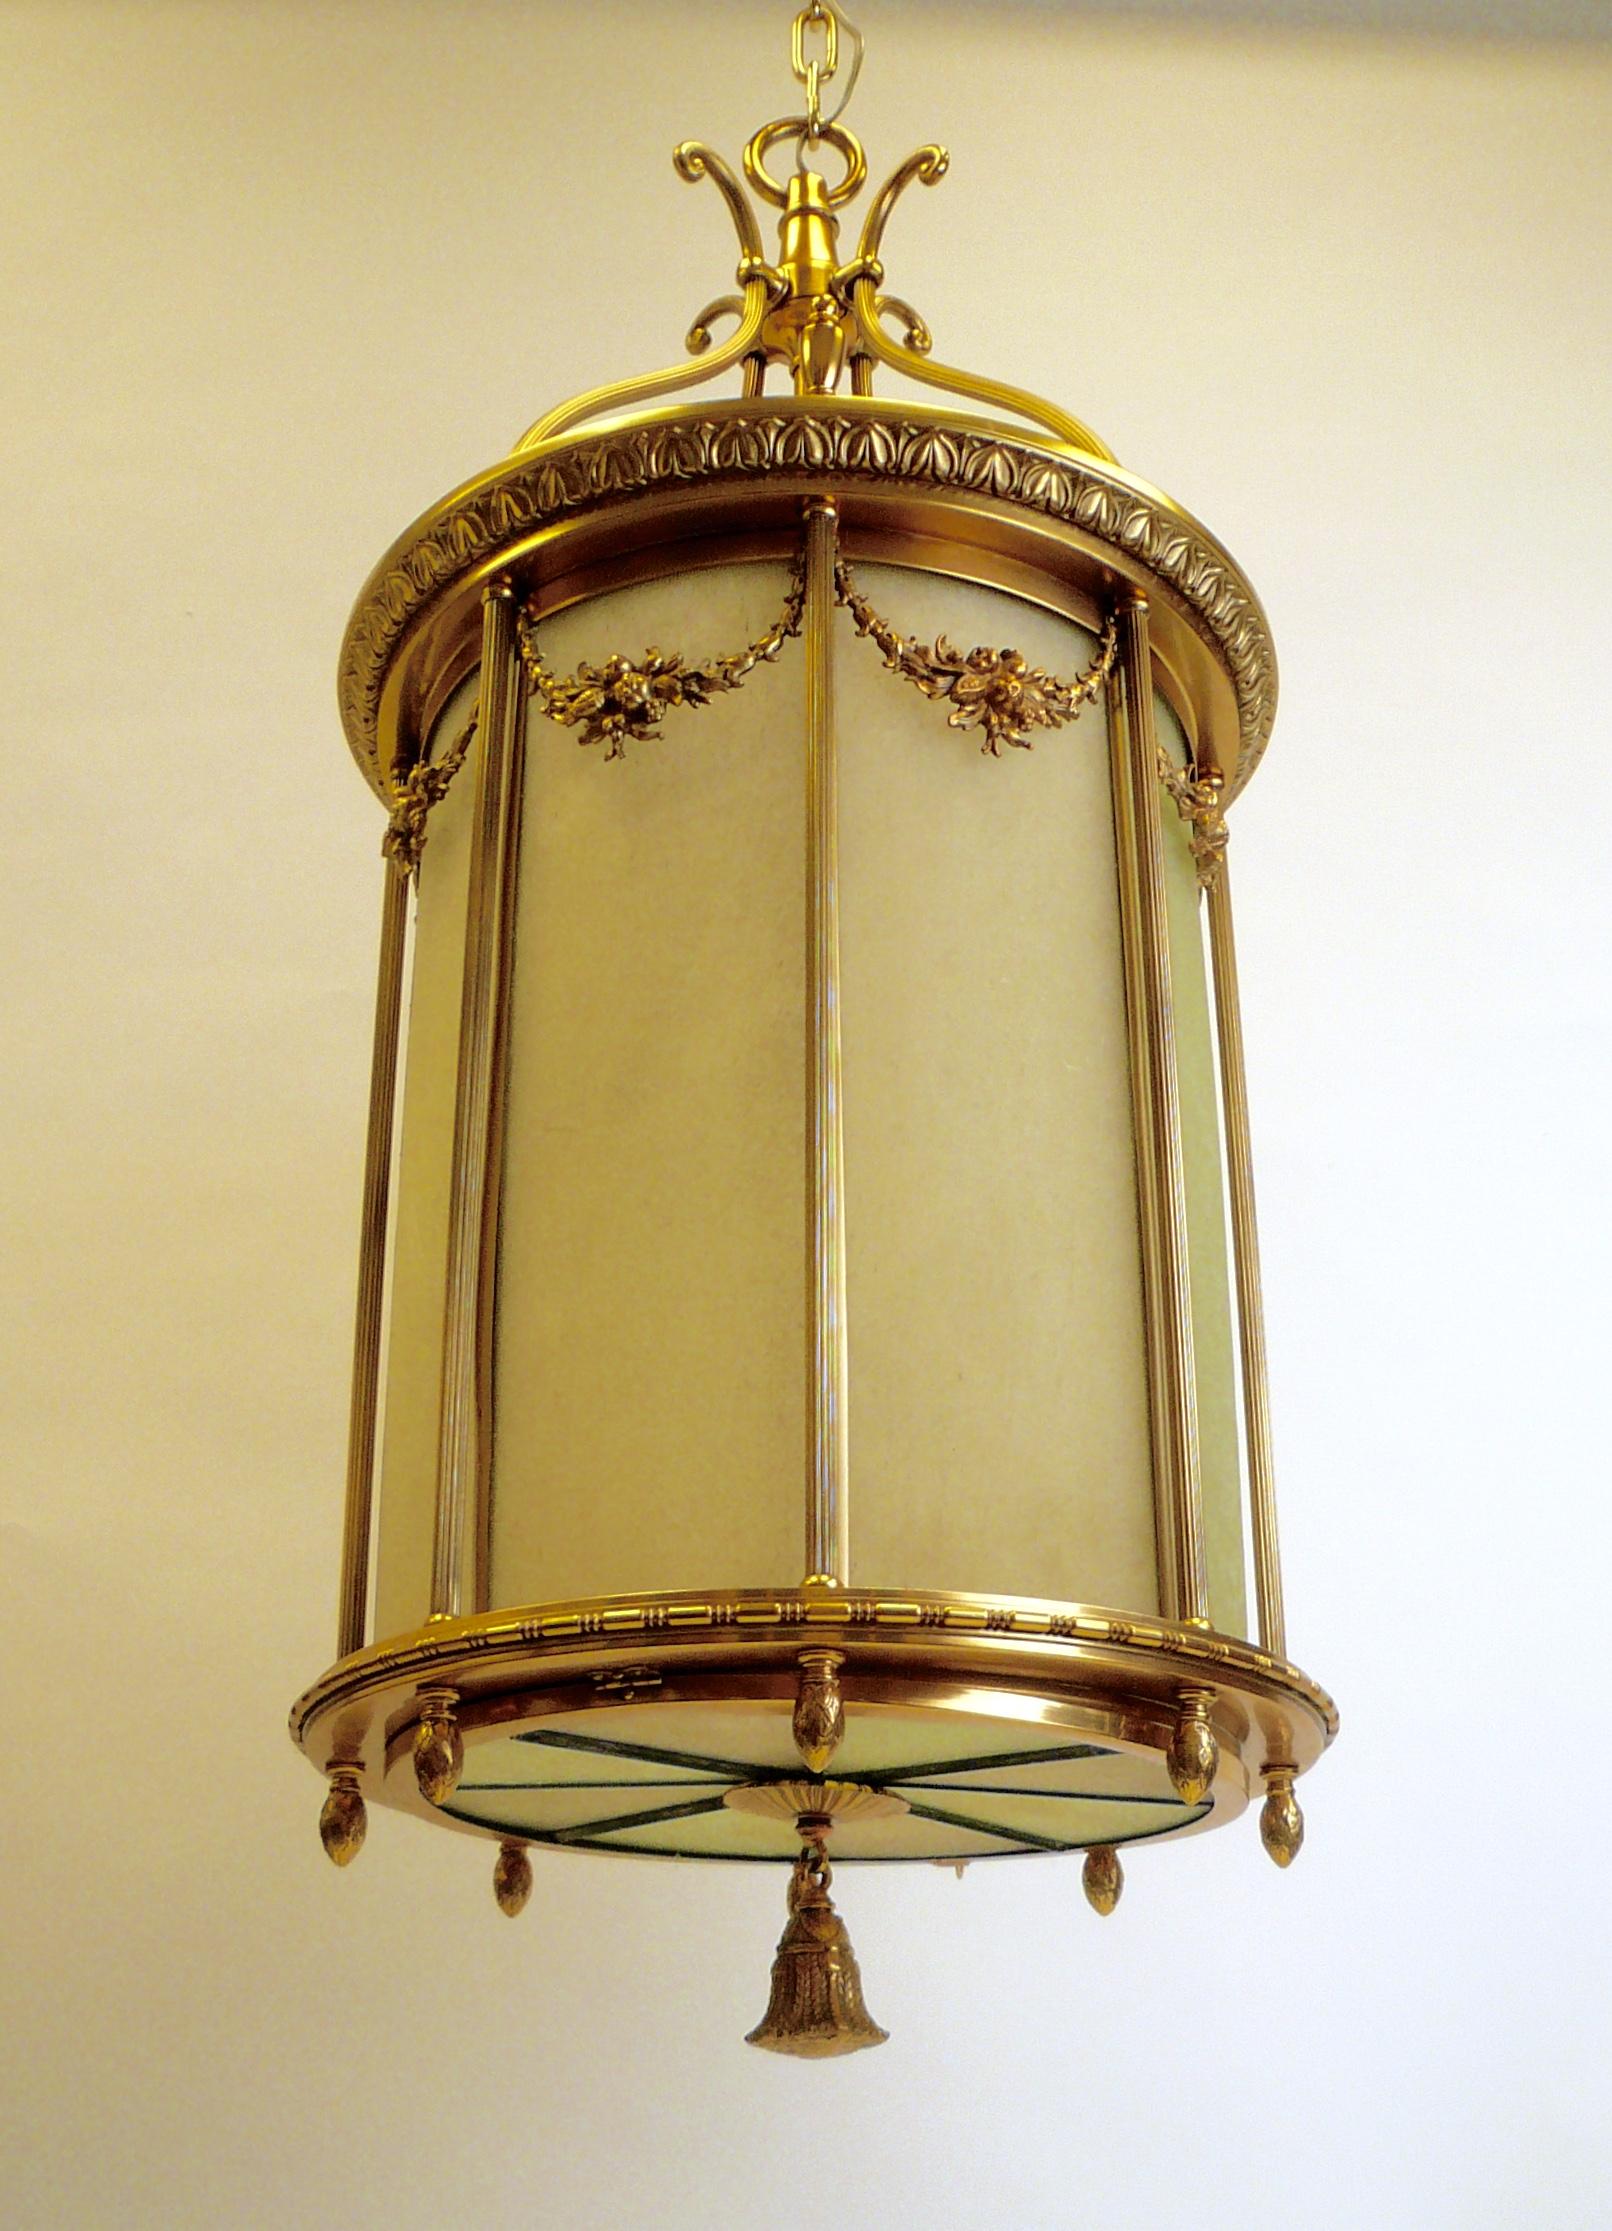 20th Century Large Gilt Bronze and Leaded Glass Neoclassical Style Lantern For Sale